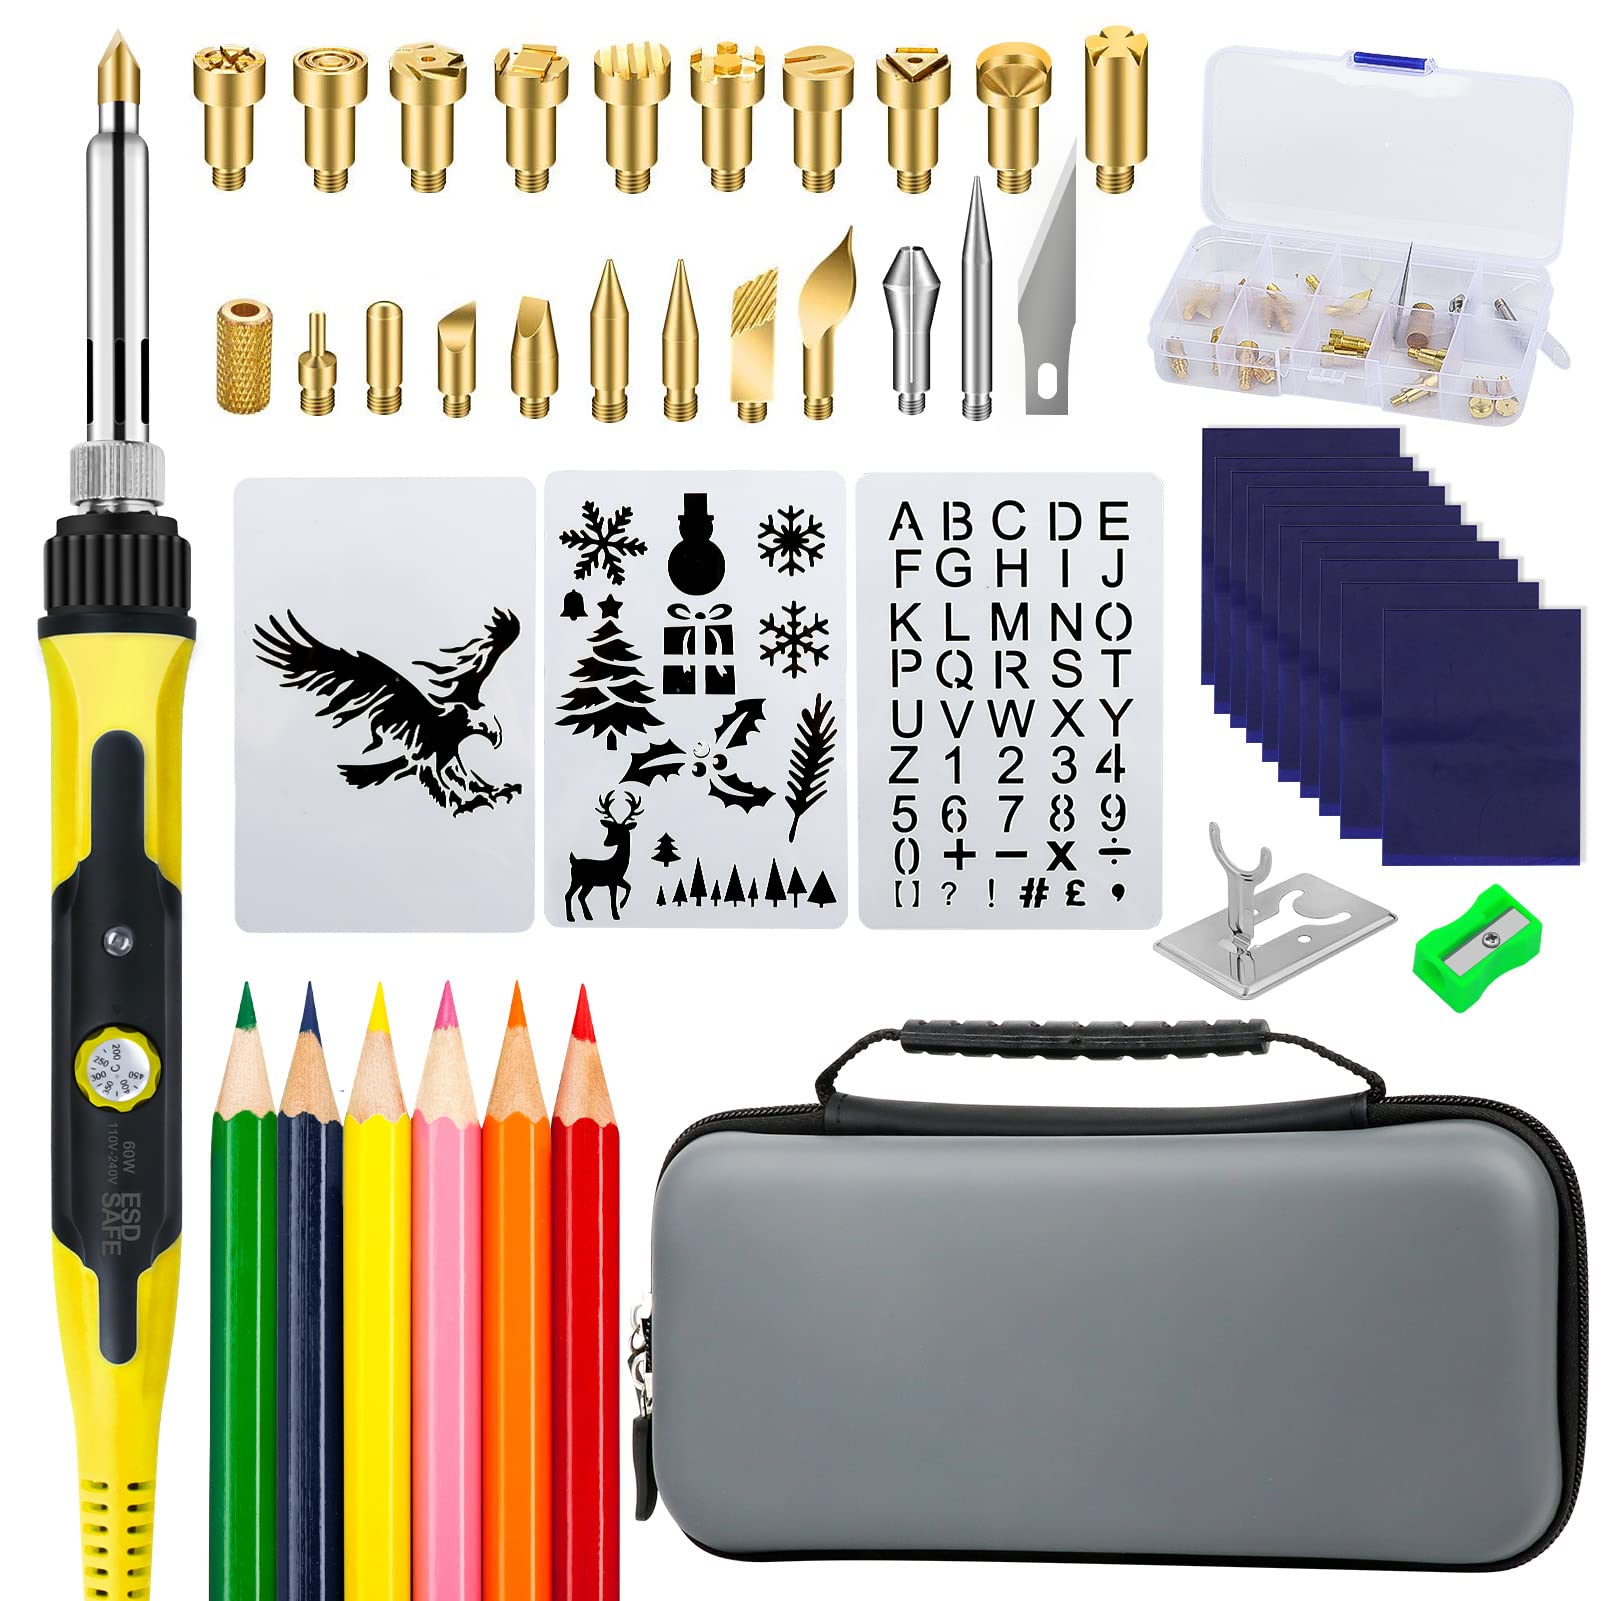 Wood Burning Kit 45PCS, Wood Burning Tool Pen with 22PCS Carving Tips,  Adjustable Temperature 200420. Professional Wood Burning Craft Tool Set for  Beginners Adults and DIY Carving (Yellow)